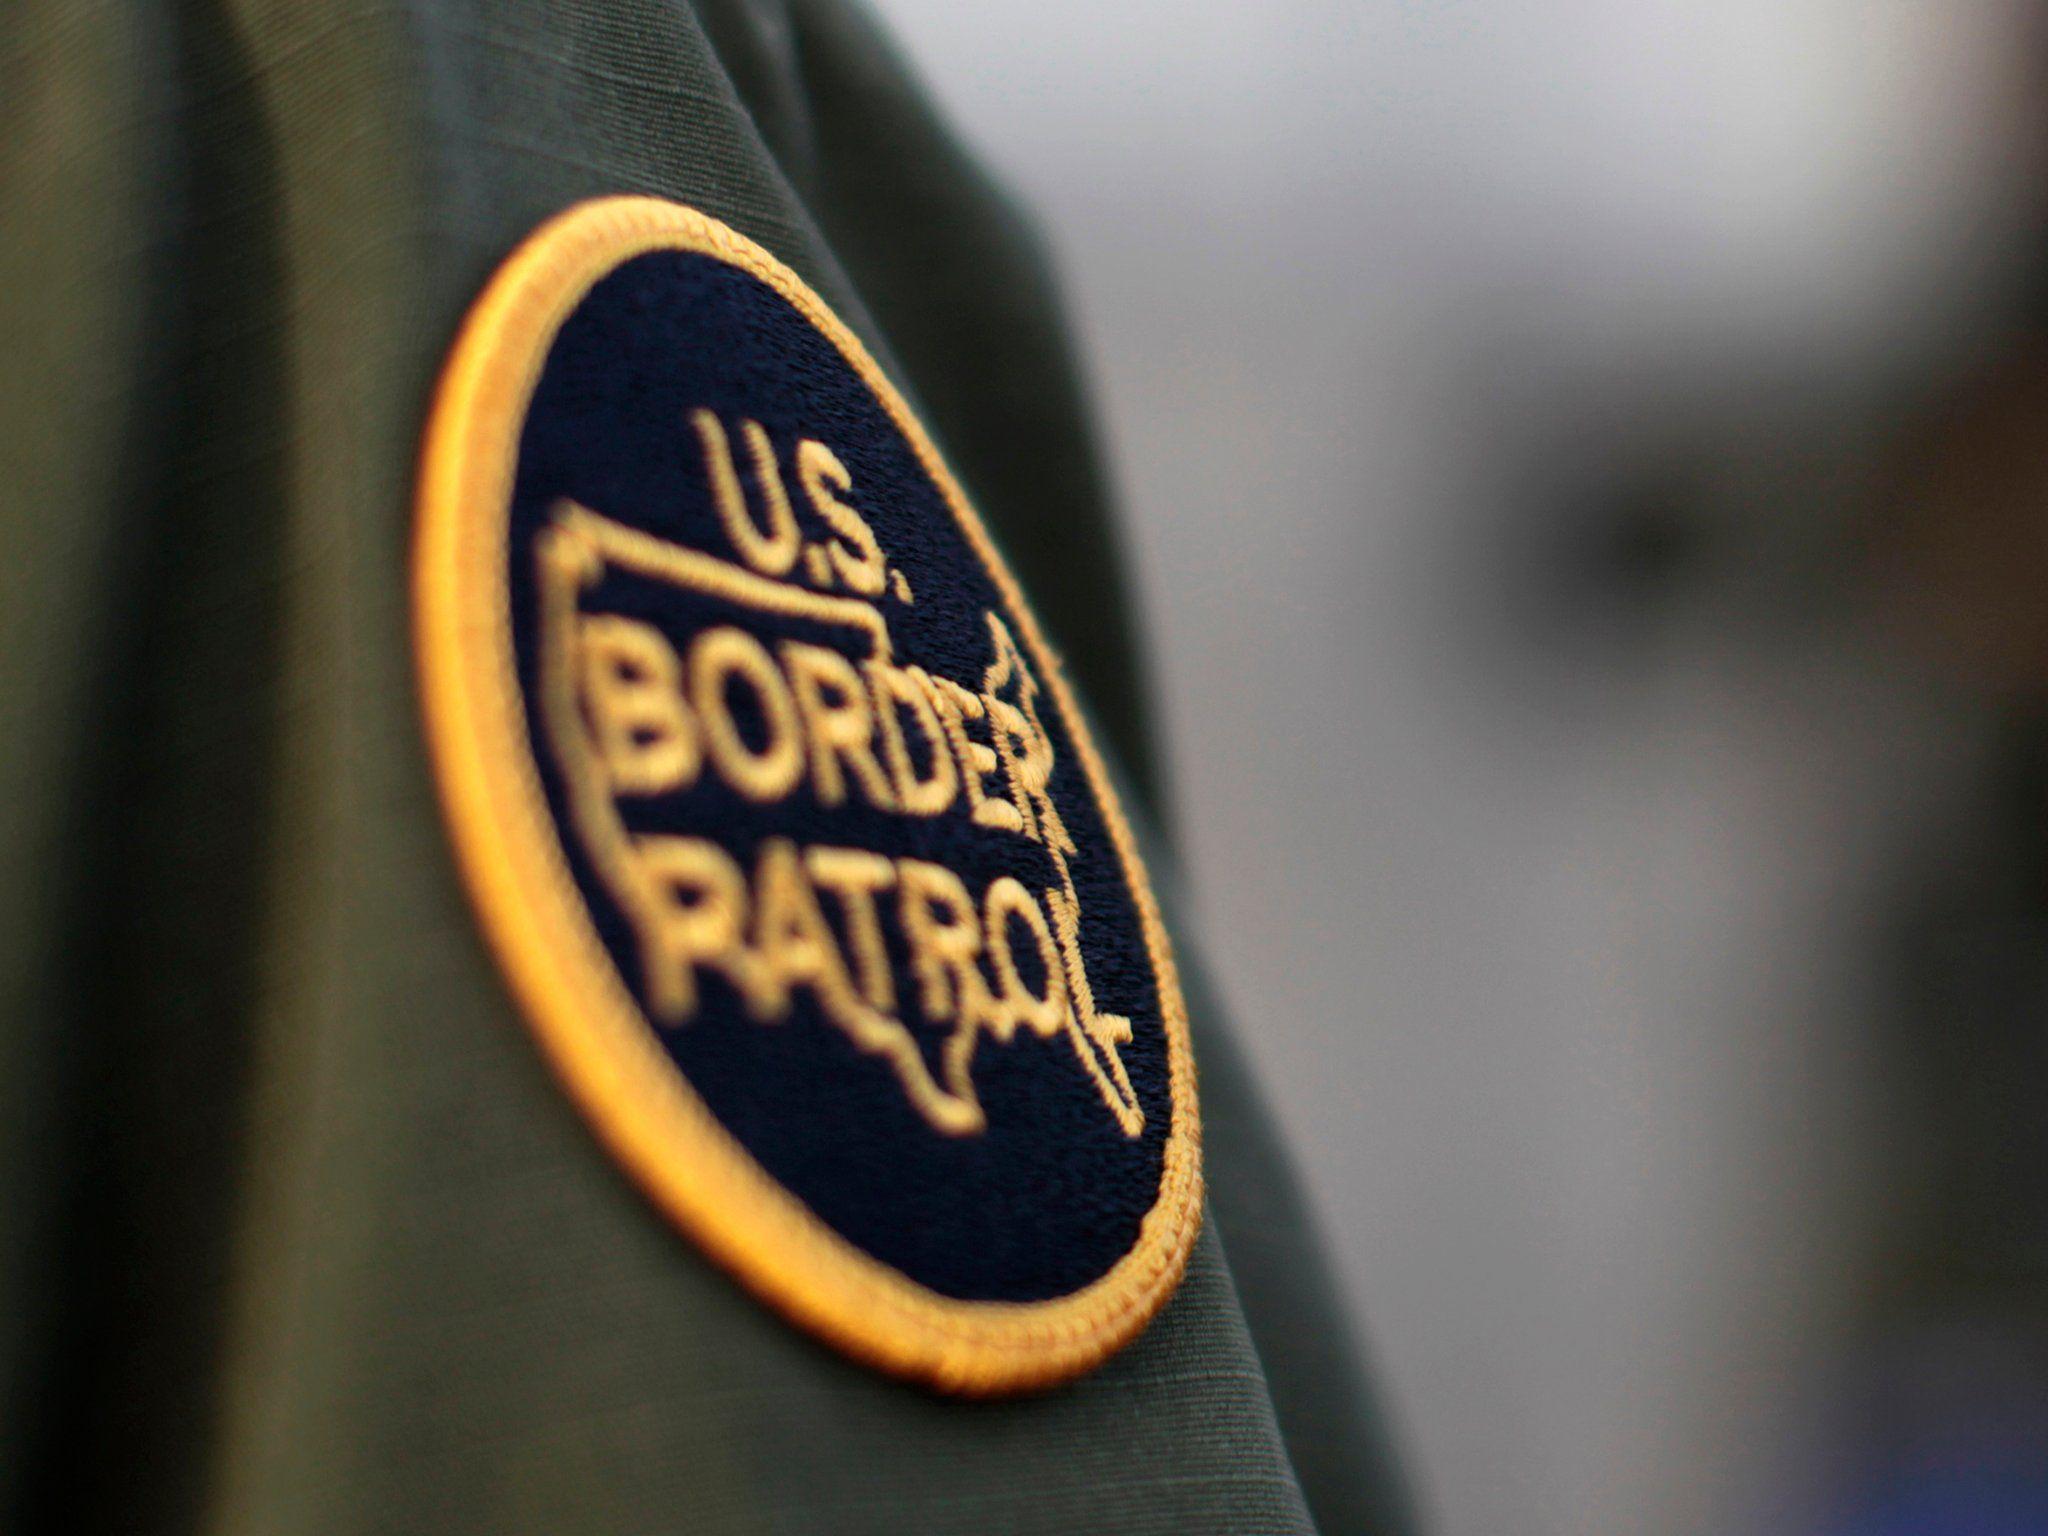 Customs and Border Patrol Logo - US Customs and Border Protection - latest news, breaking stories and ...